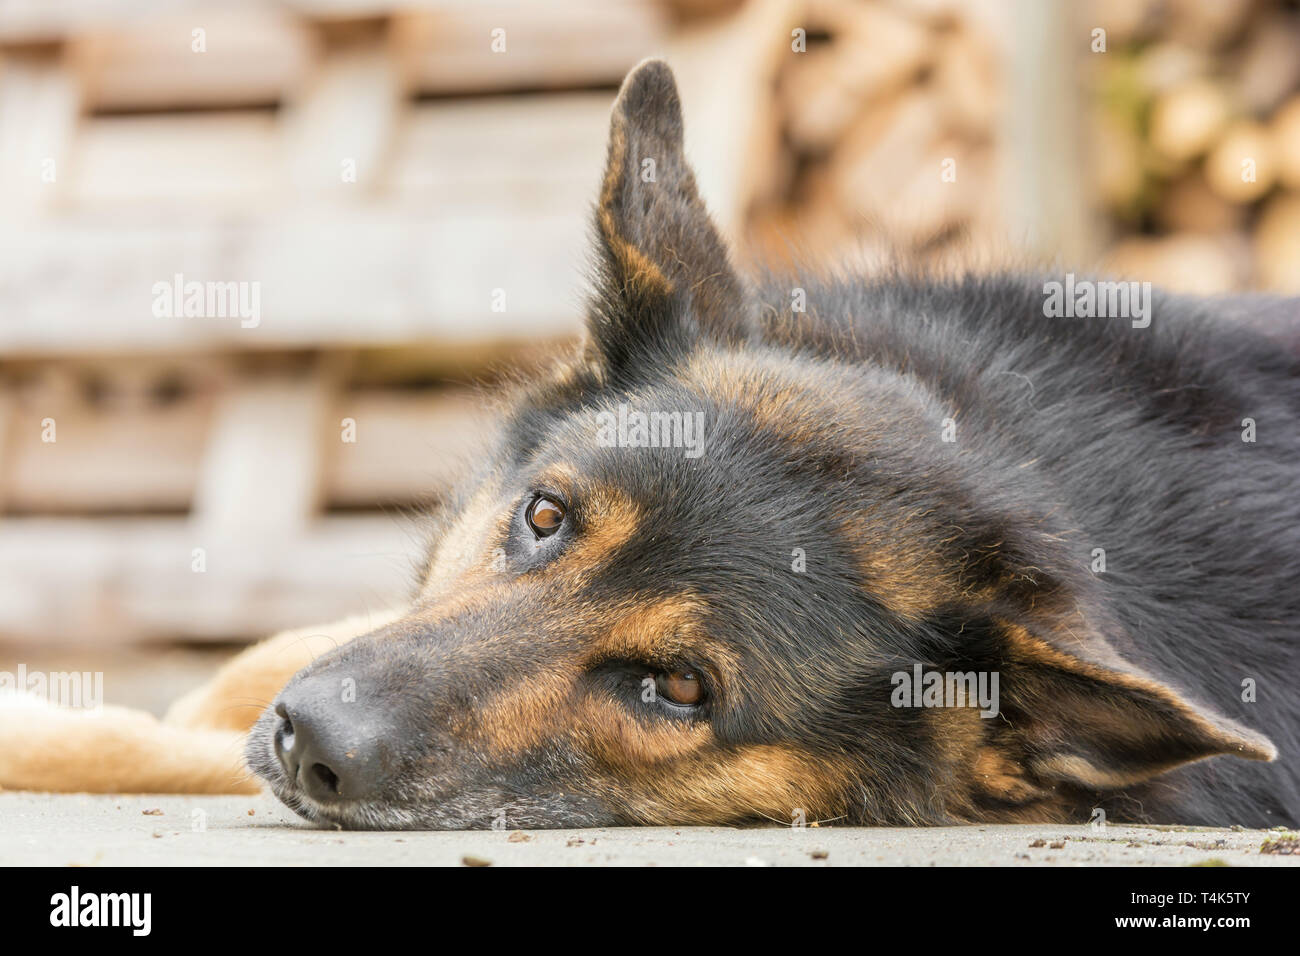 Big dog looks curious during a break Stock Photo - Alamy